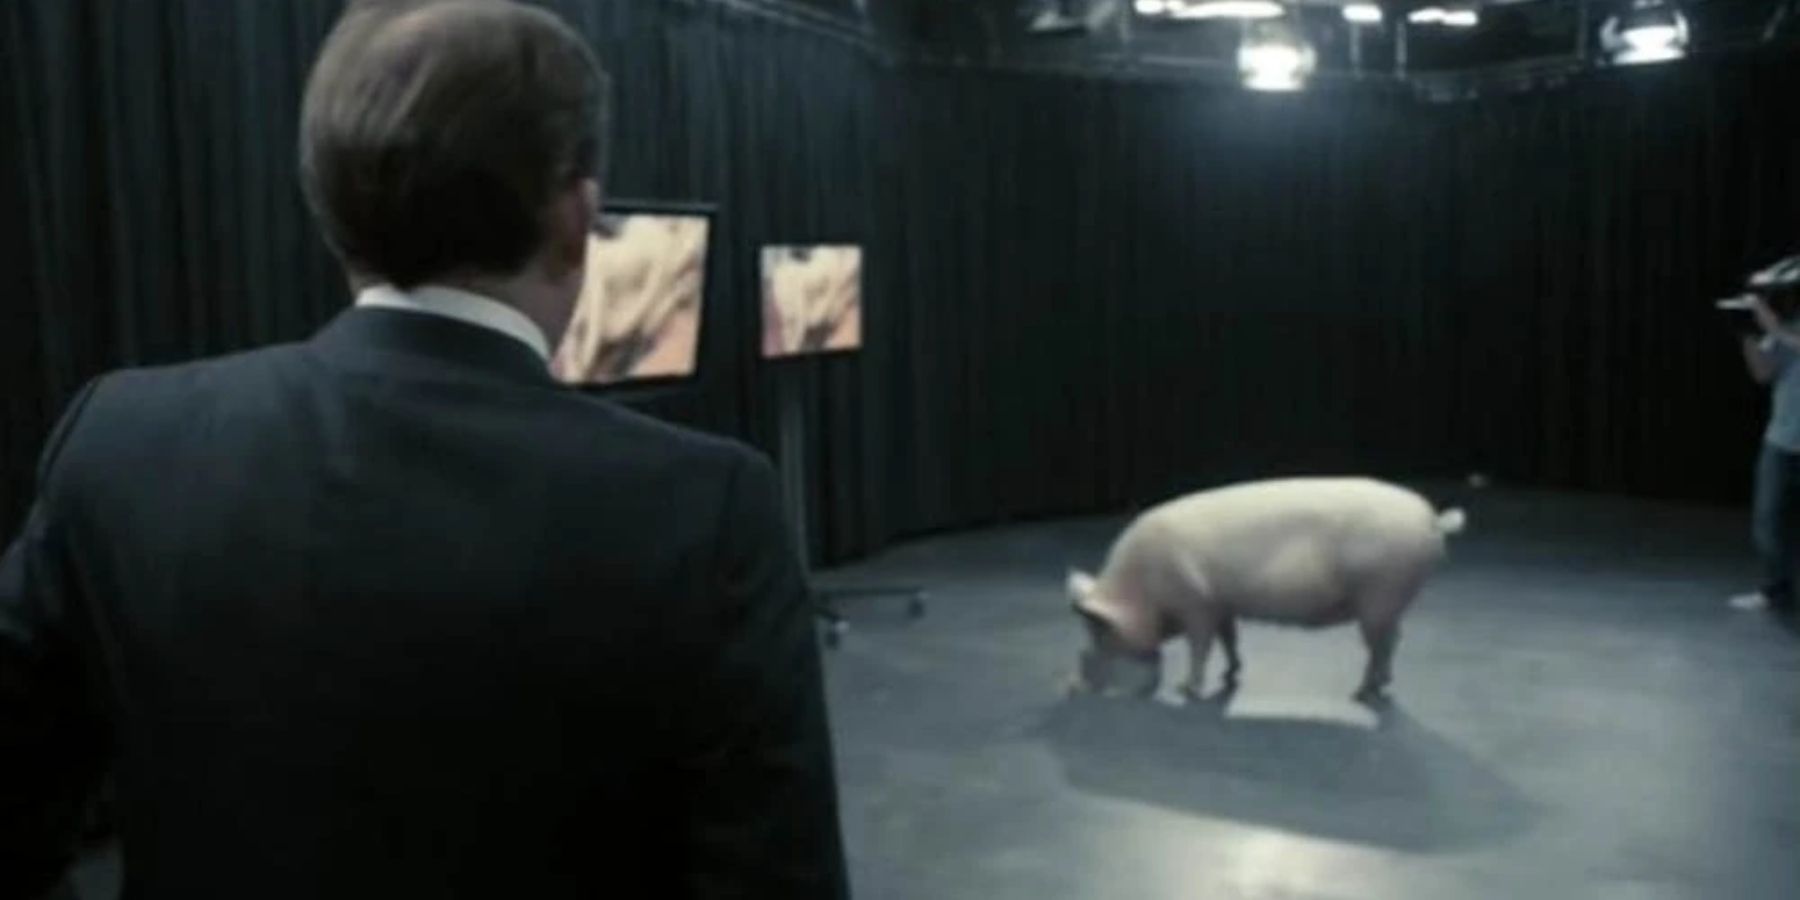 A man staring at a pig in the Black Mirror episode The National Anthem